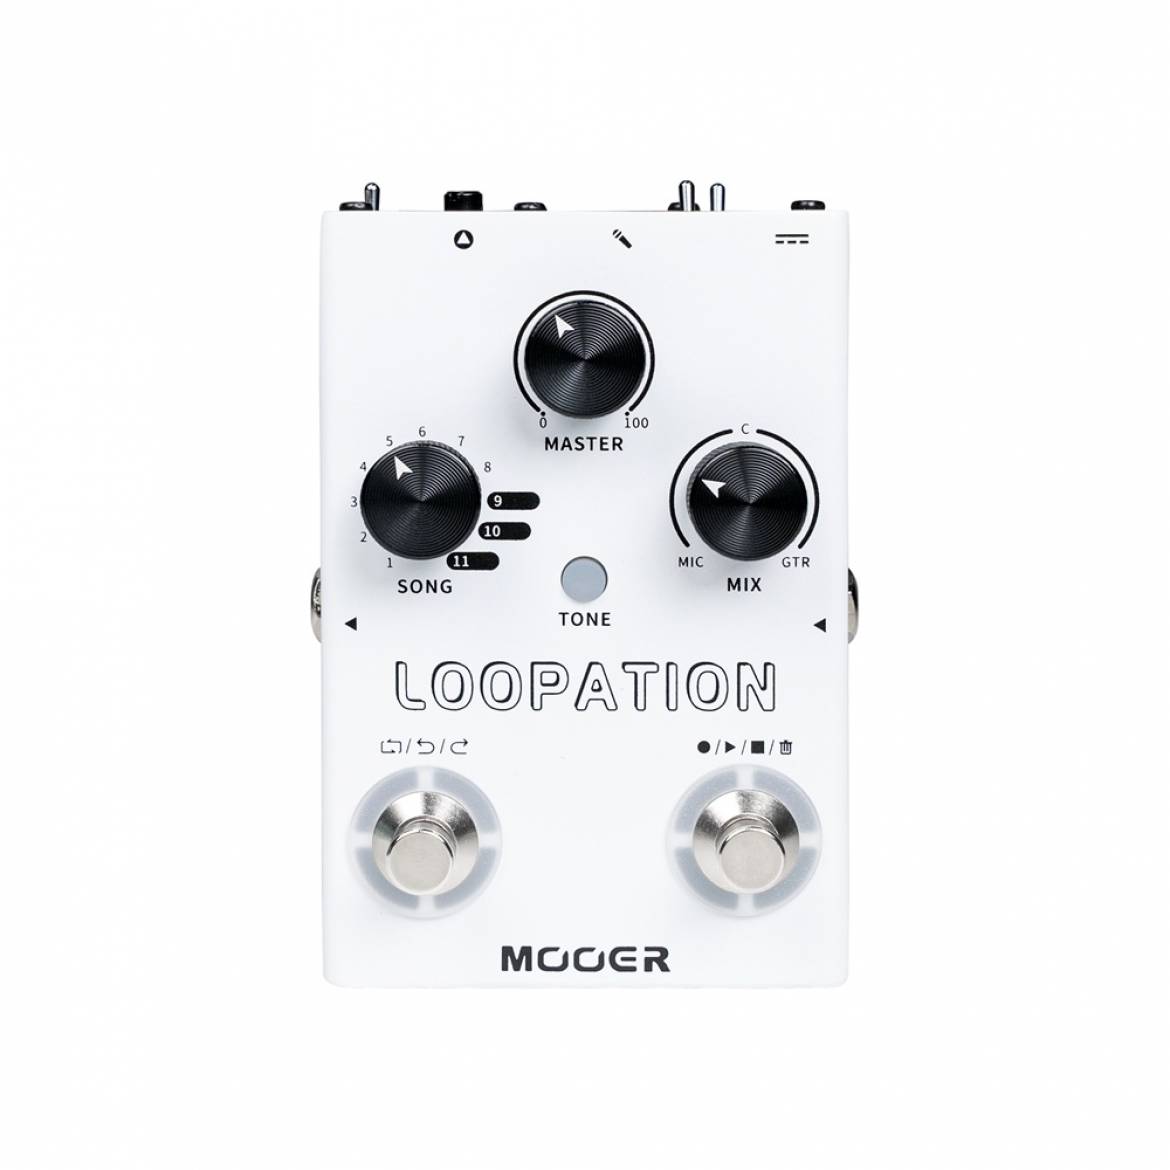 MOOER MVP3 LOOPATION VOCAL LOOPATION PEDAL